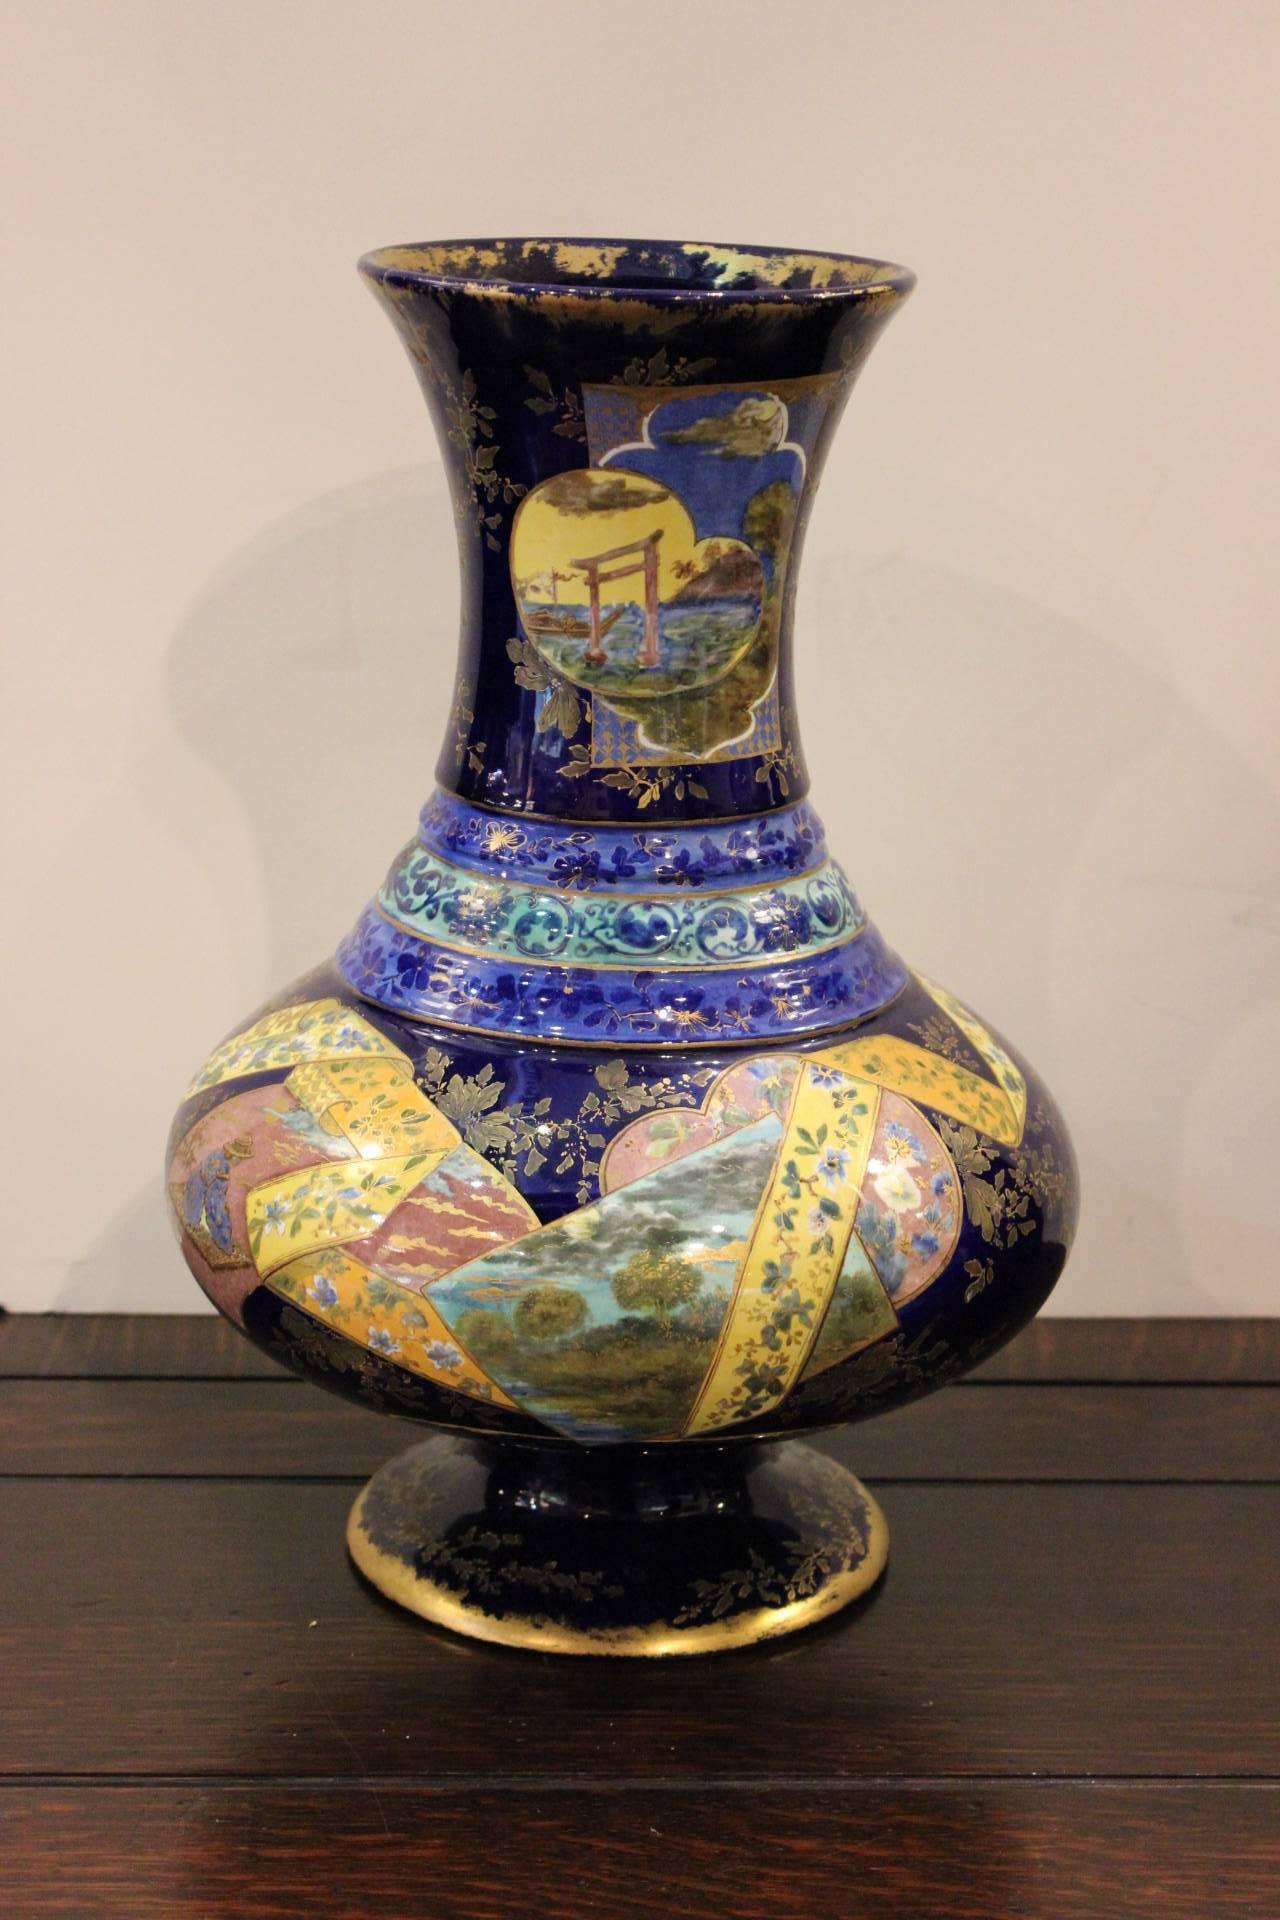 Exquisitely painted French faience chinoiserie bulbous pedestal vase. The intricately painted body in vibrant Asian motif with a cobalt background. Subtle gilt highlights on the top and base.